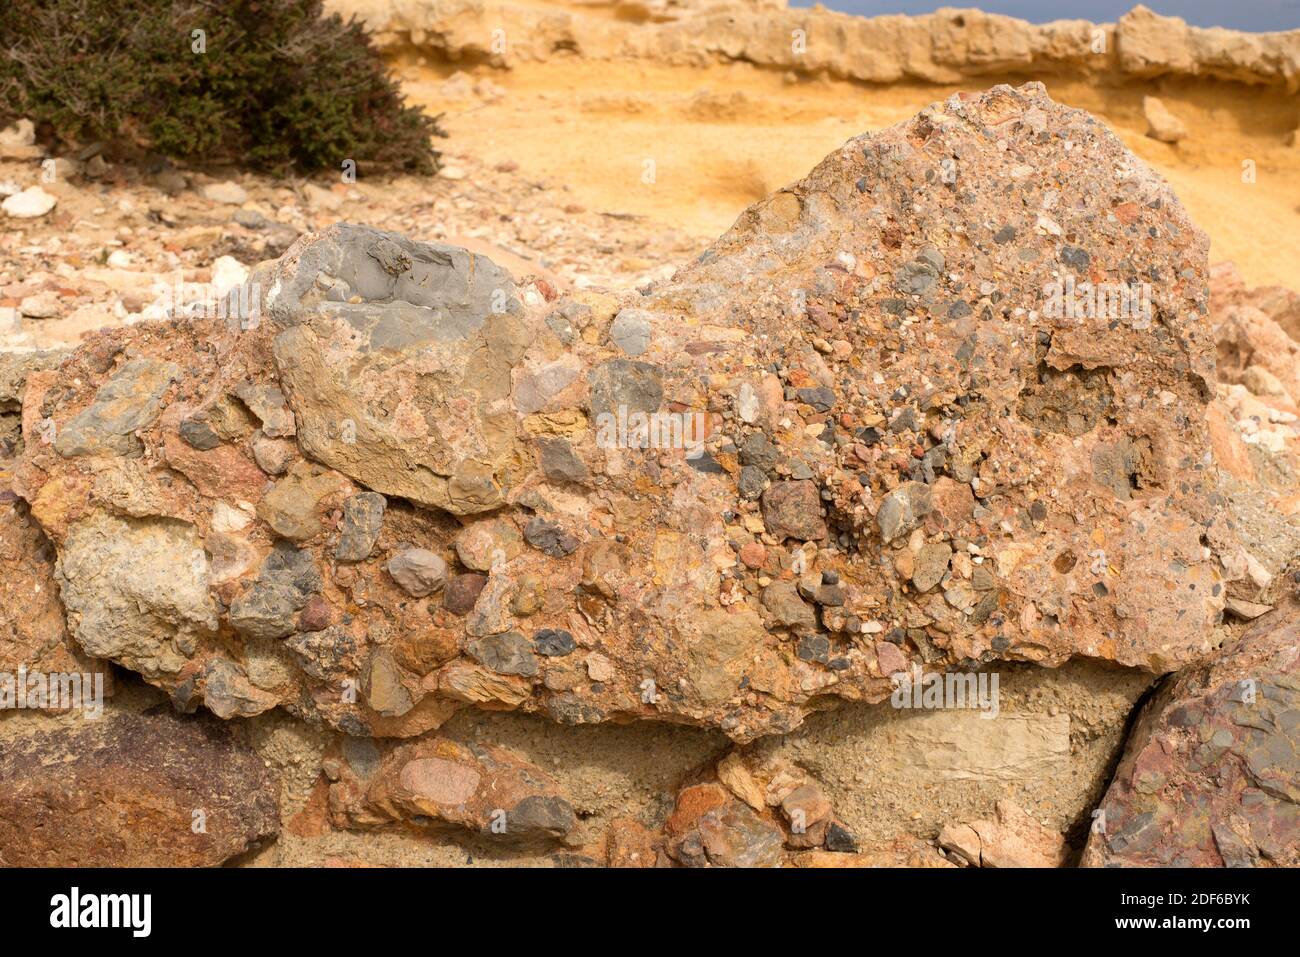 Conglomerate is a clastic sedimentary rock composed of rounded clasts (pudding stone). This sample comes from Cabo de Gata, Almeria, Andalusia, Spain. Stock Photo